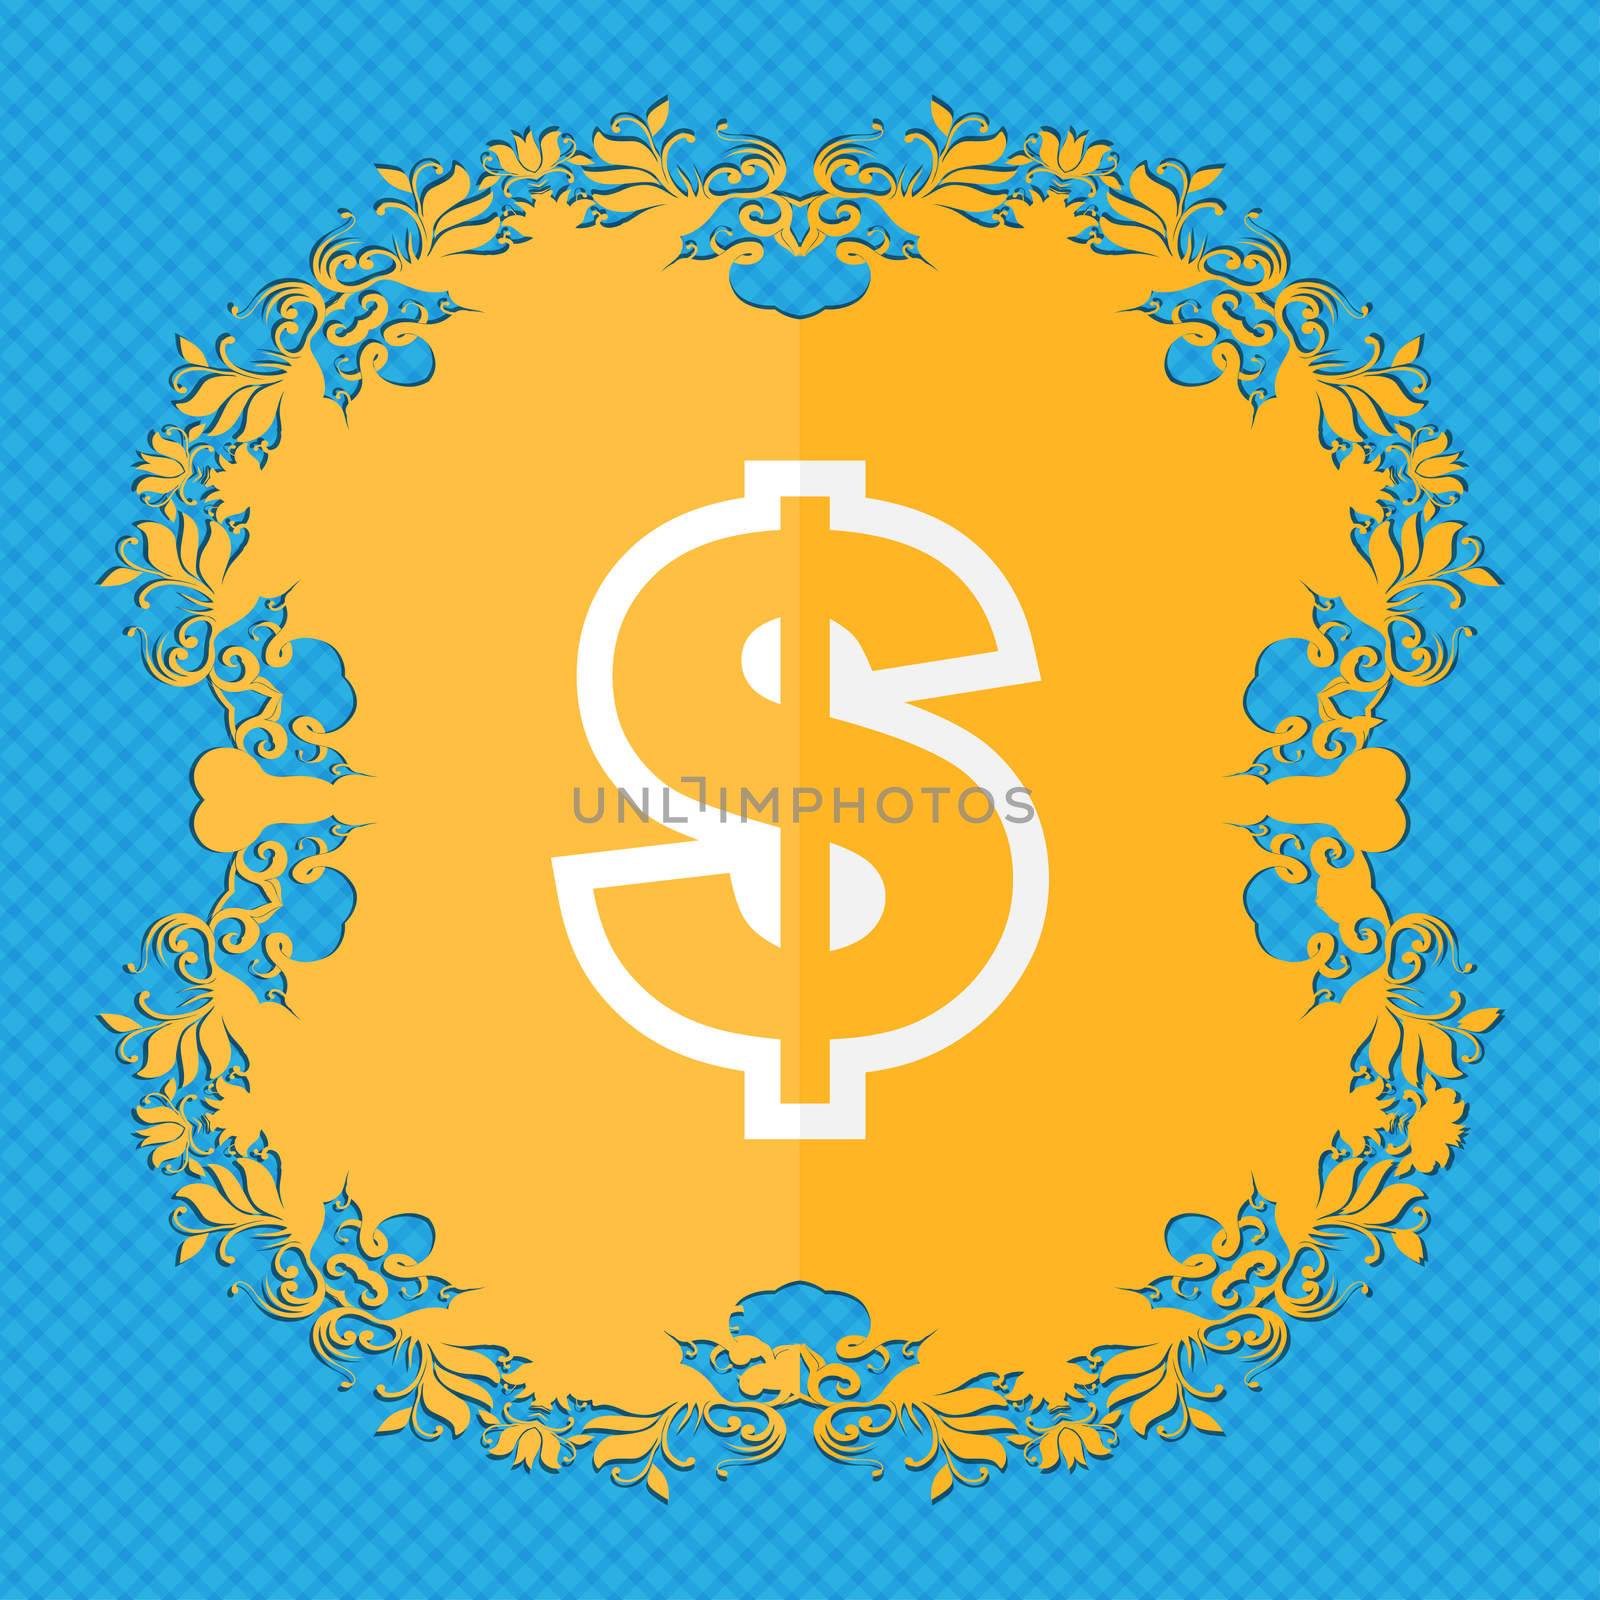 Dollar. Floral flat design on a blue abstract background with place for your text. illustration